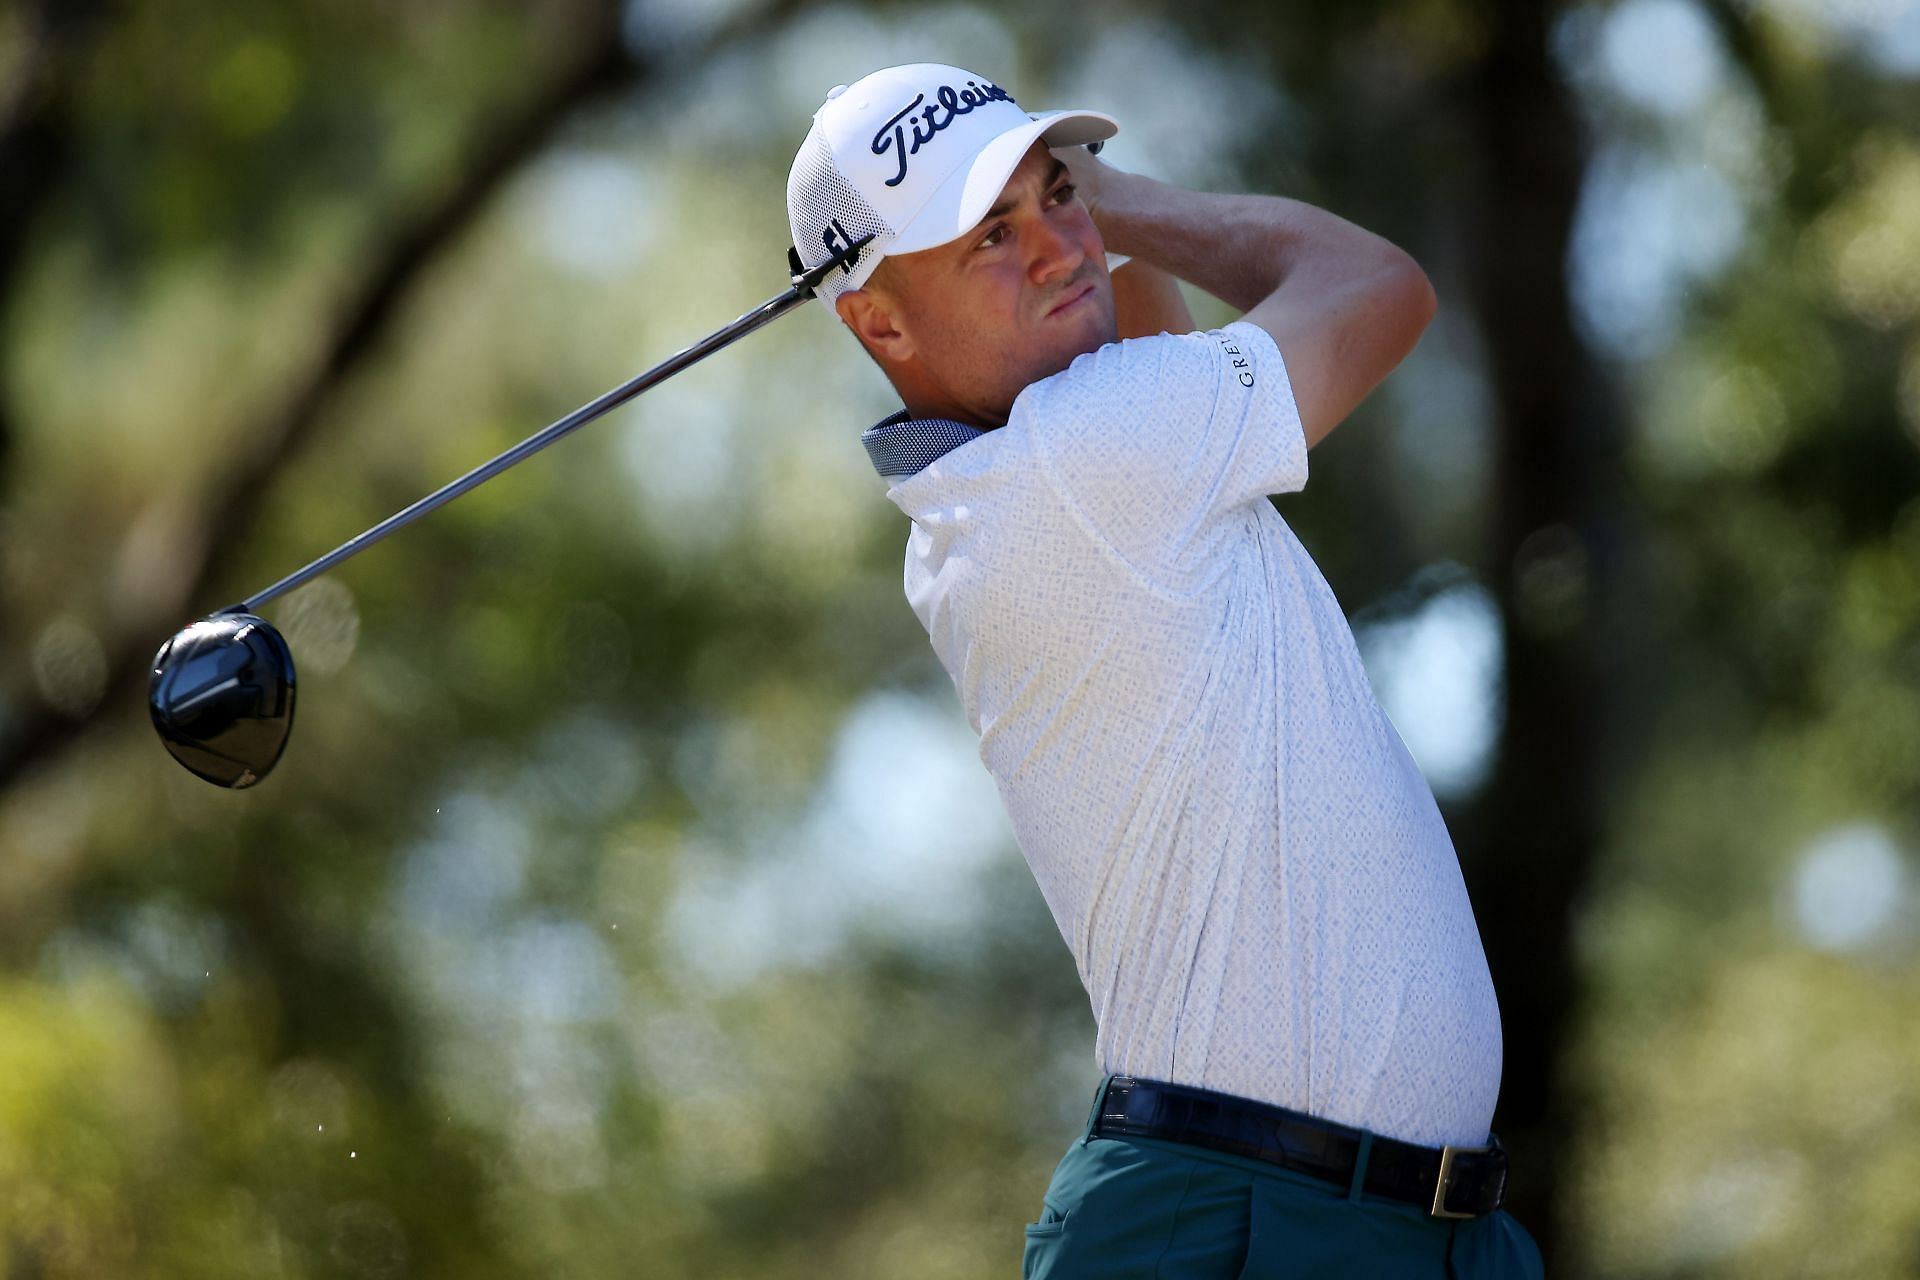 Justin Thomas at The CJ Cup - Round Three (Image via Mike Mulholland/Getty Images for The CJ Cup)